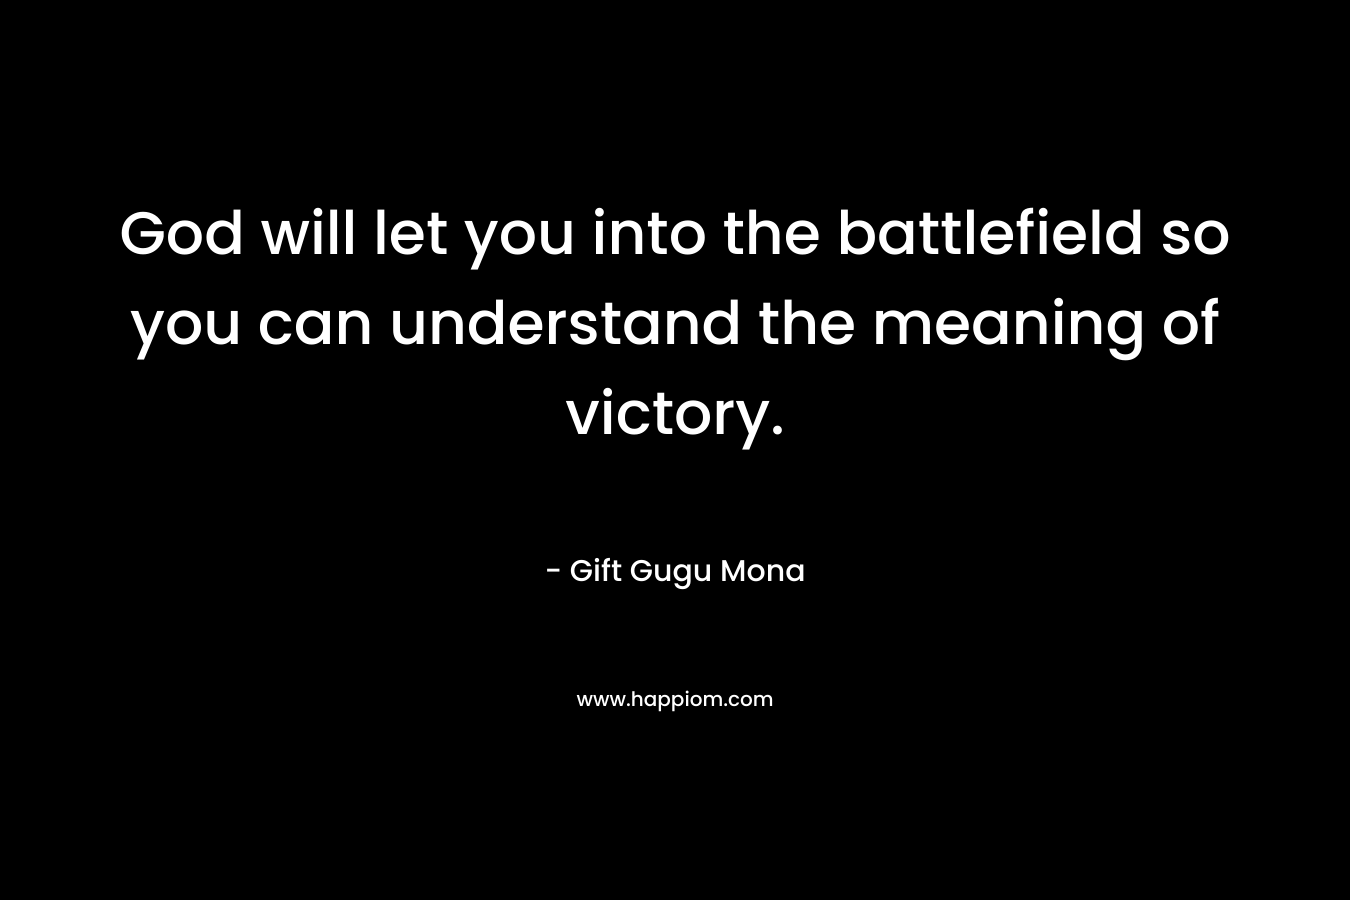 God will let you into the battlefield so you can understand the meaning of victory.